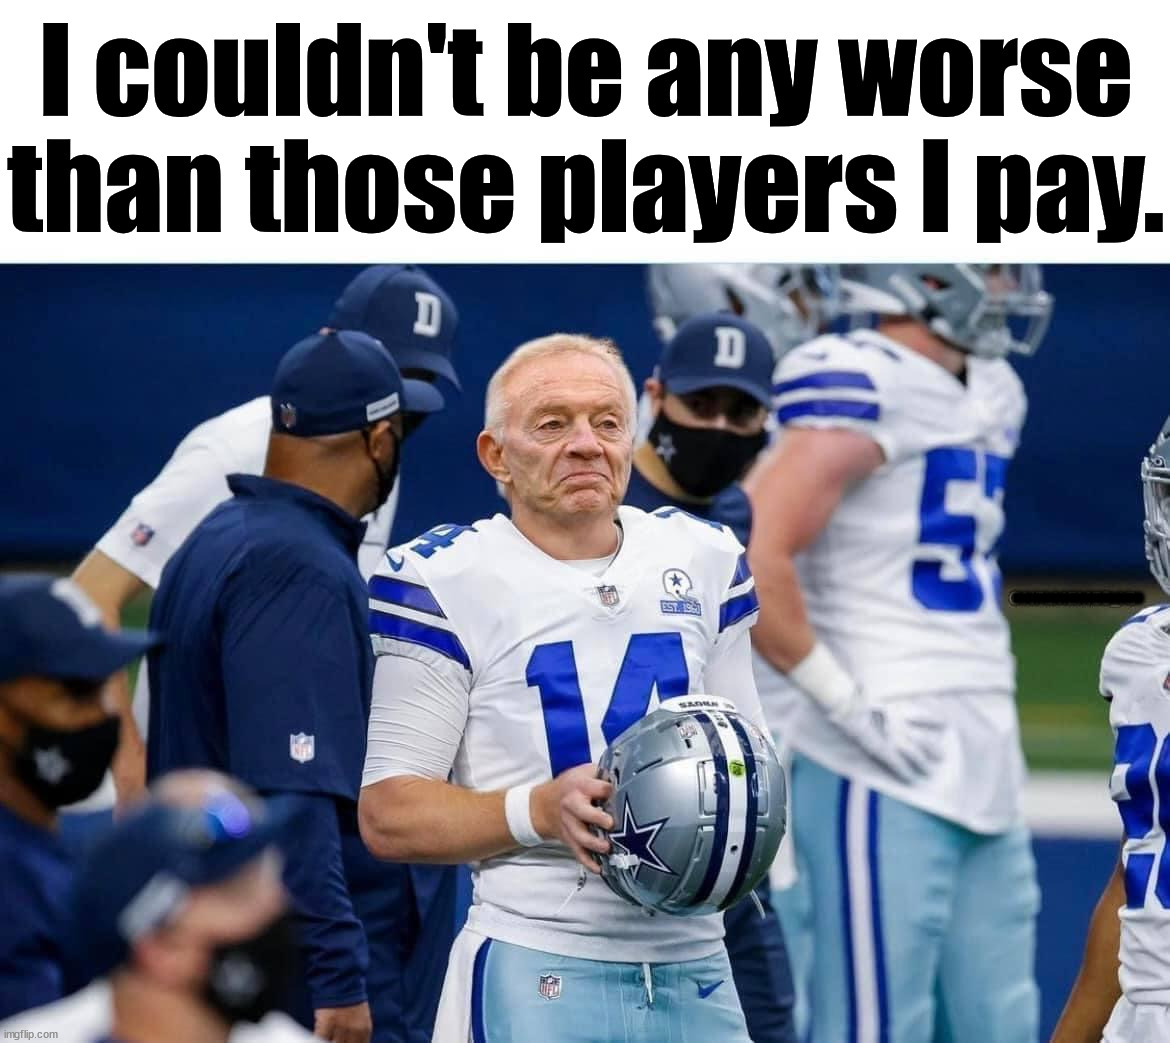 The Cowboys go down again. |  I couldn't be any worse than those players I pay. .............. | image tagged in sports | made w/ Imgflip meme maker